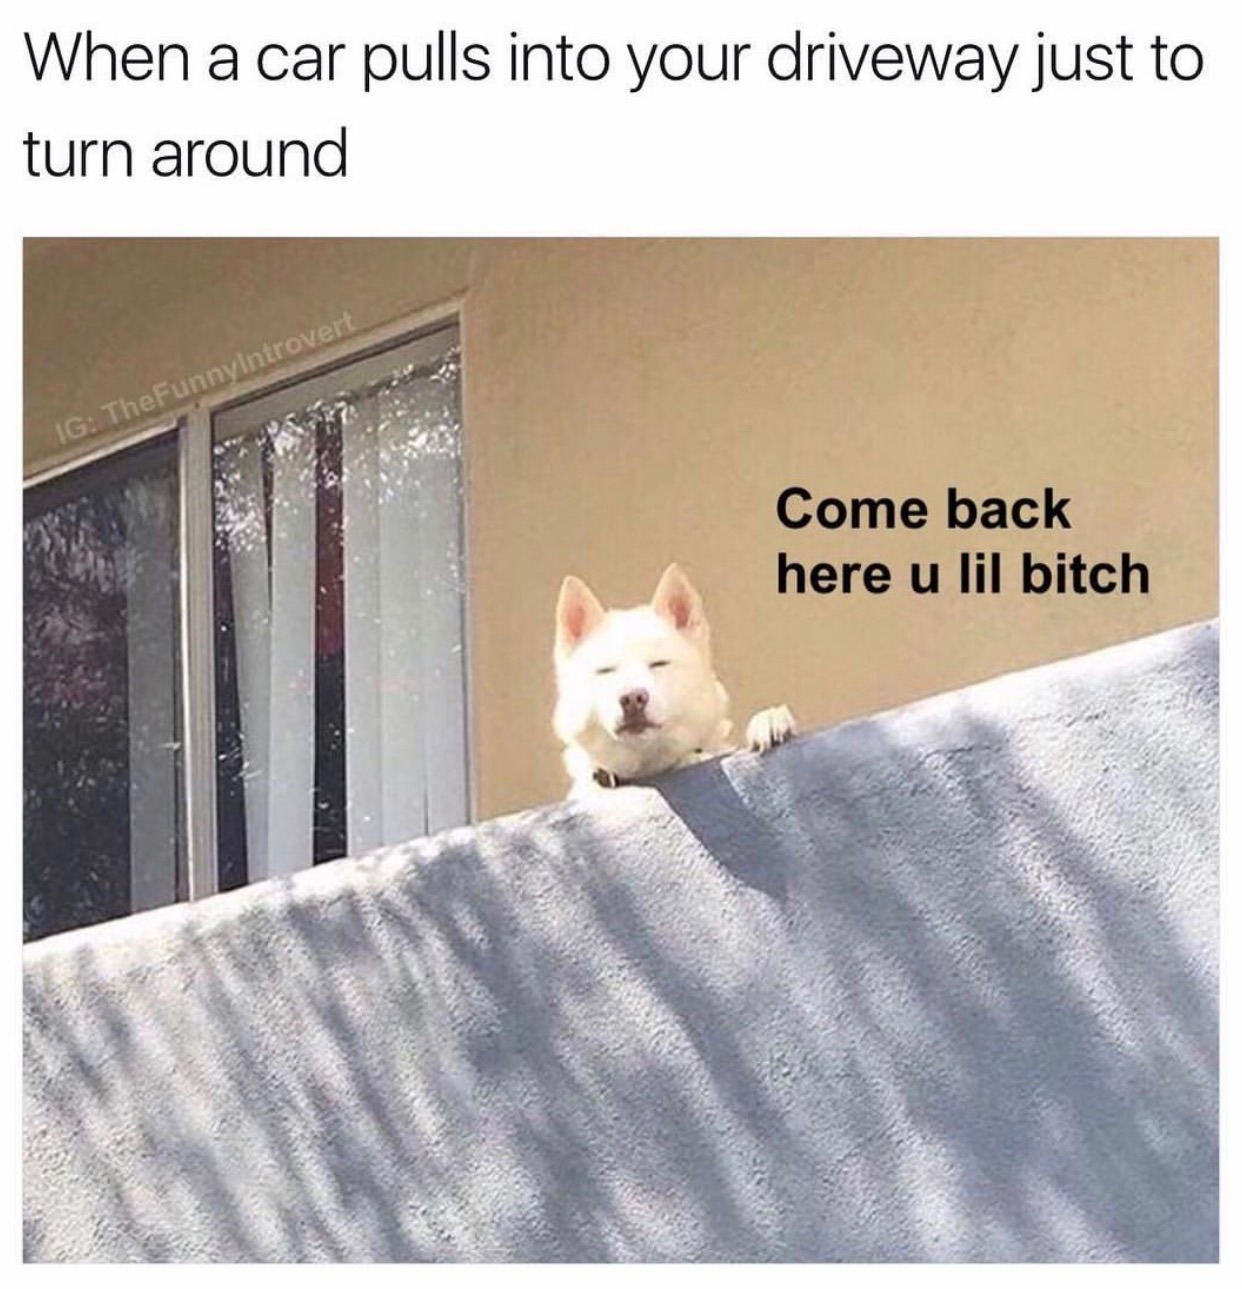 memes - dog judging meme - When a car pulls into your driveway just to turn around G TheFunnyIntrovert Come back here u lil bitch